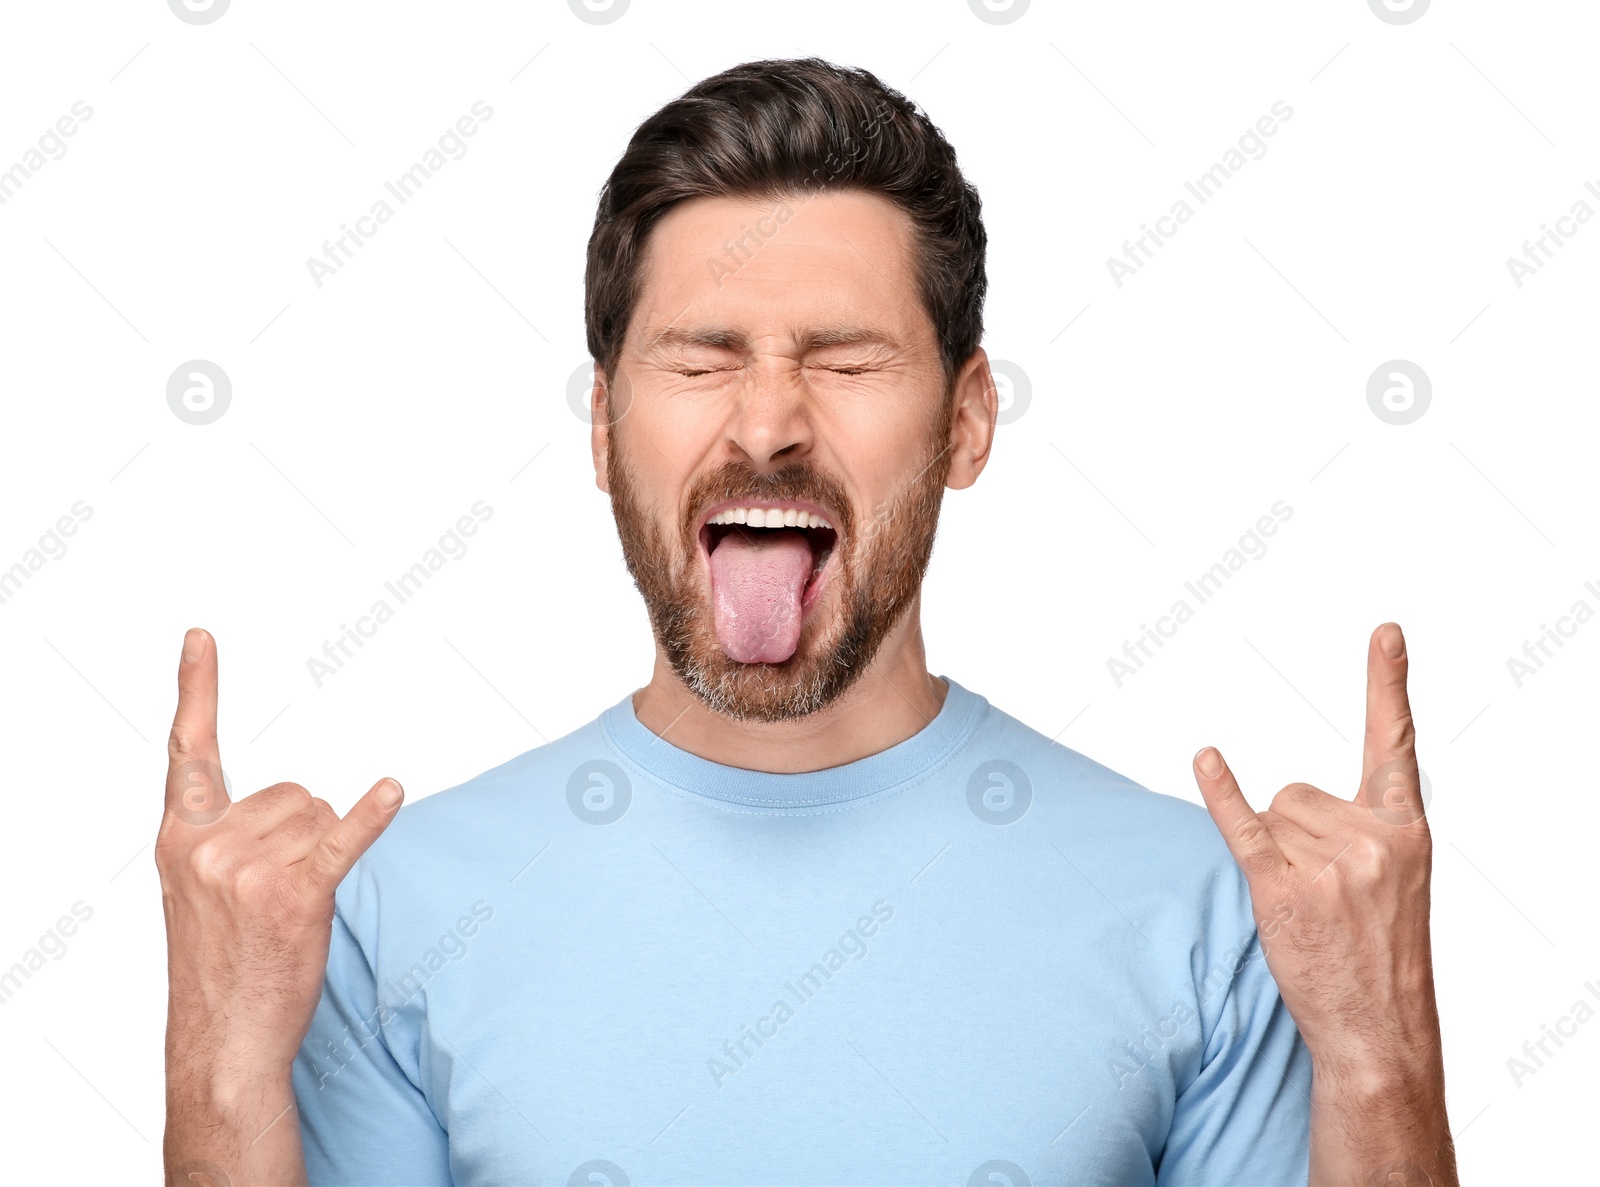 Photo of Man showing his tongue and rock gesture on white background